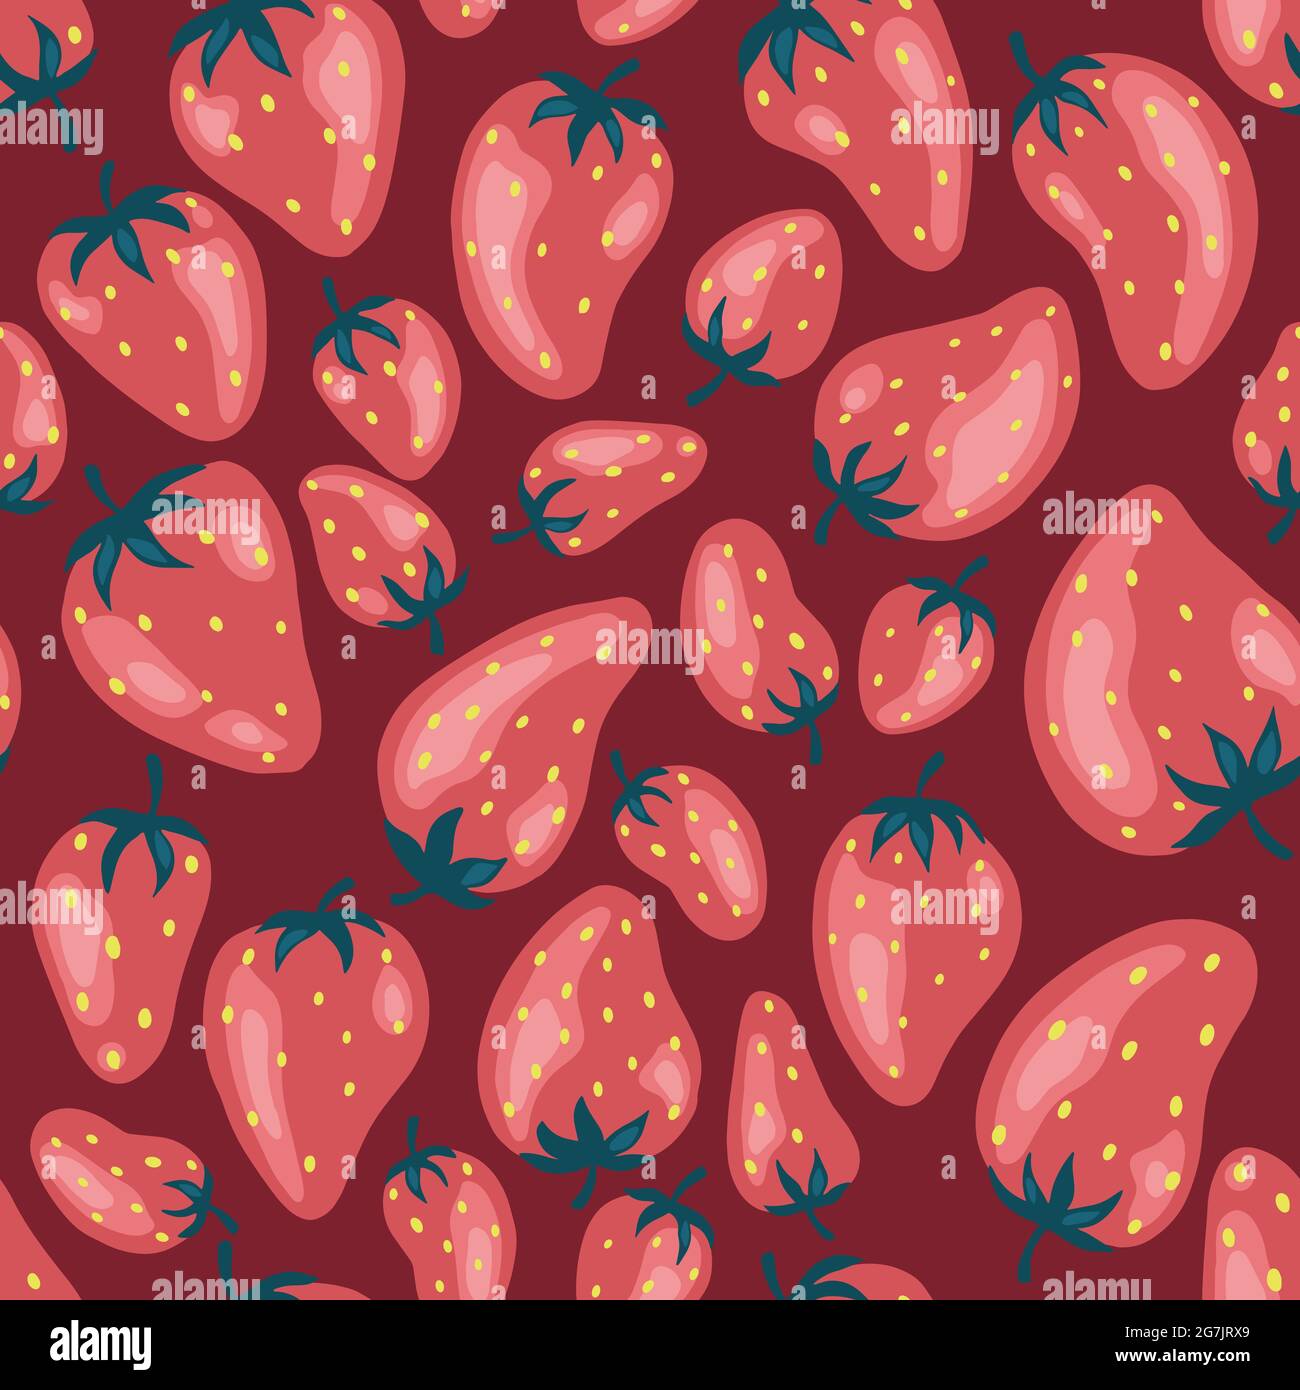 Seamless pattern of fresh strawberry background. Used for magazine, book,card, menu cover, web pages. Stock Vector